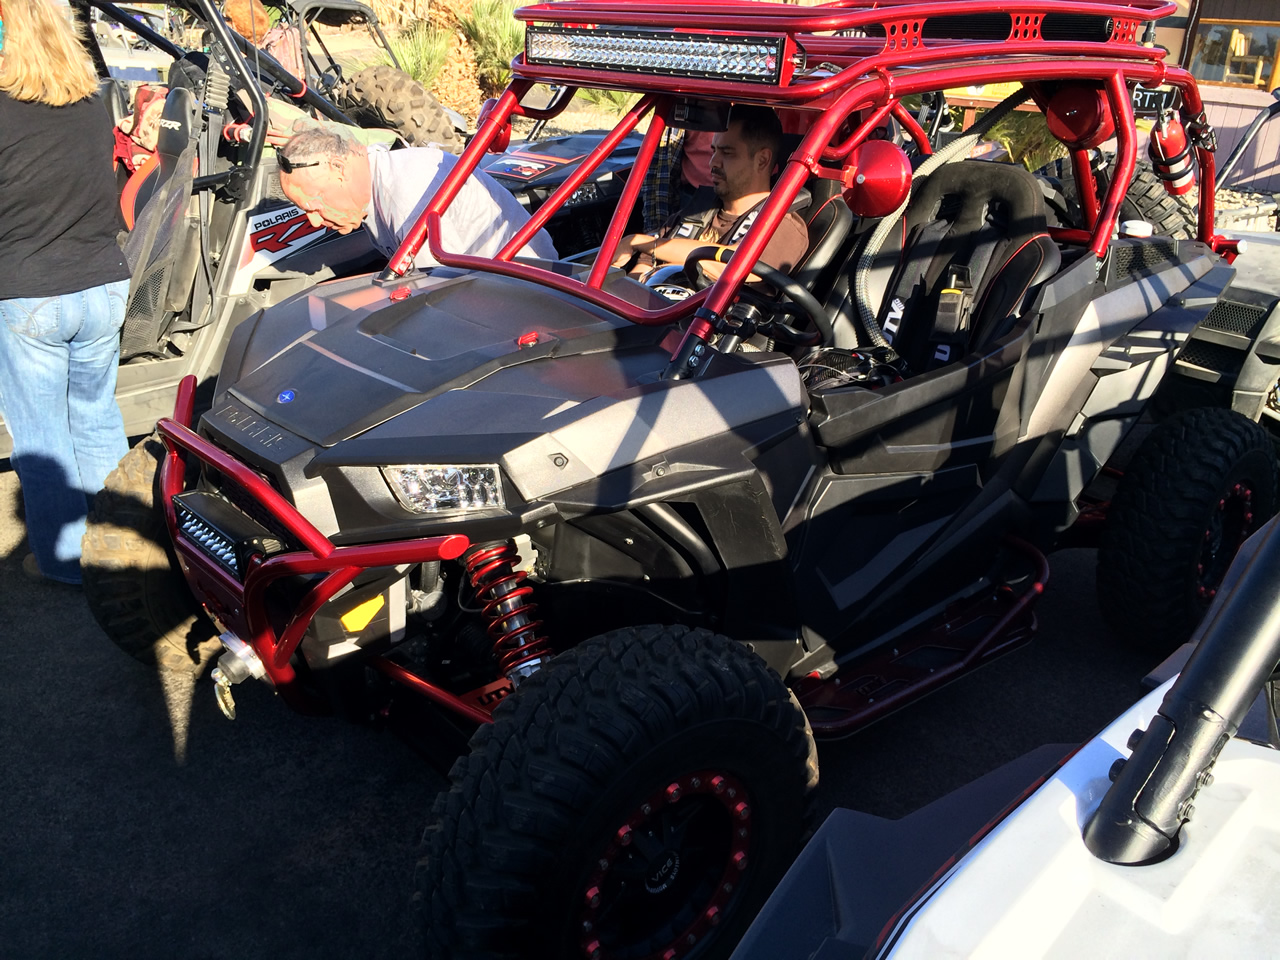 A finely outfitted RZR at the annual RZR forum